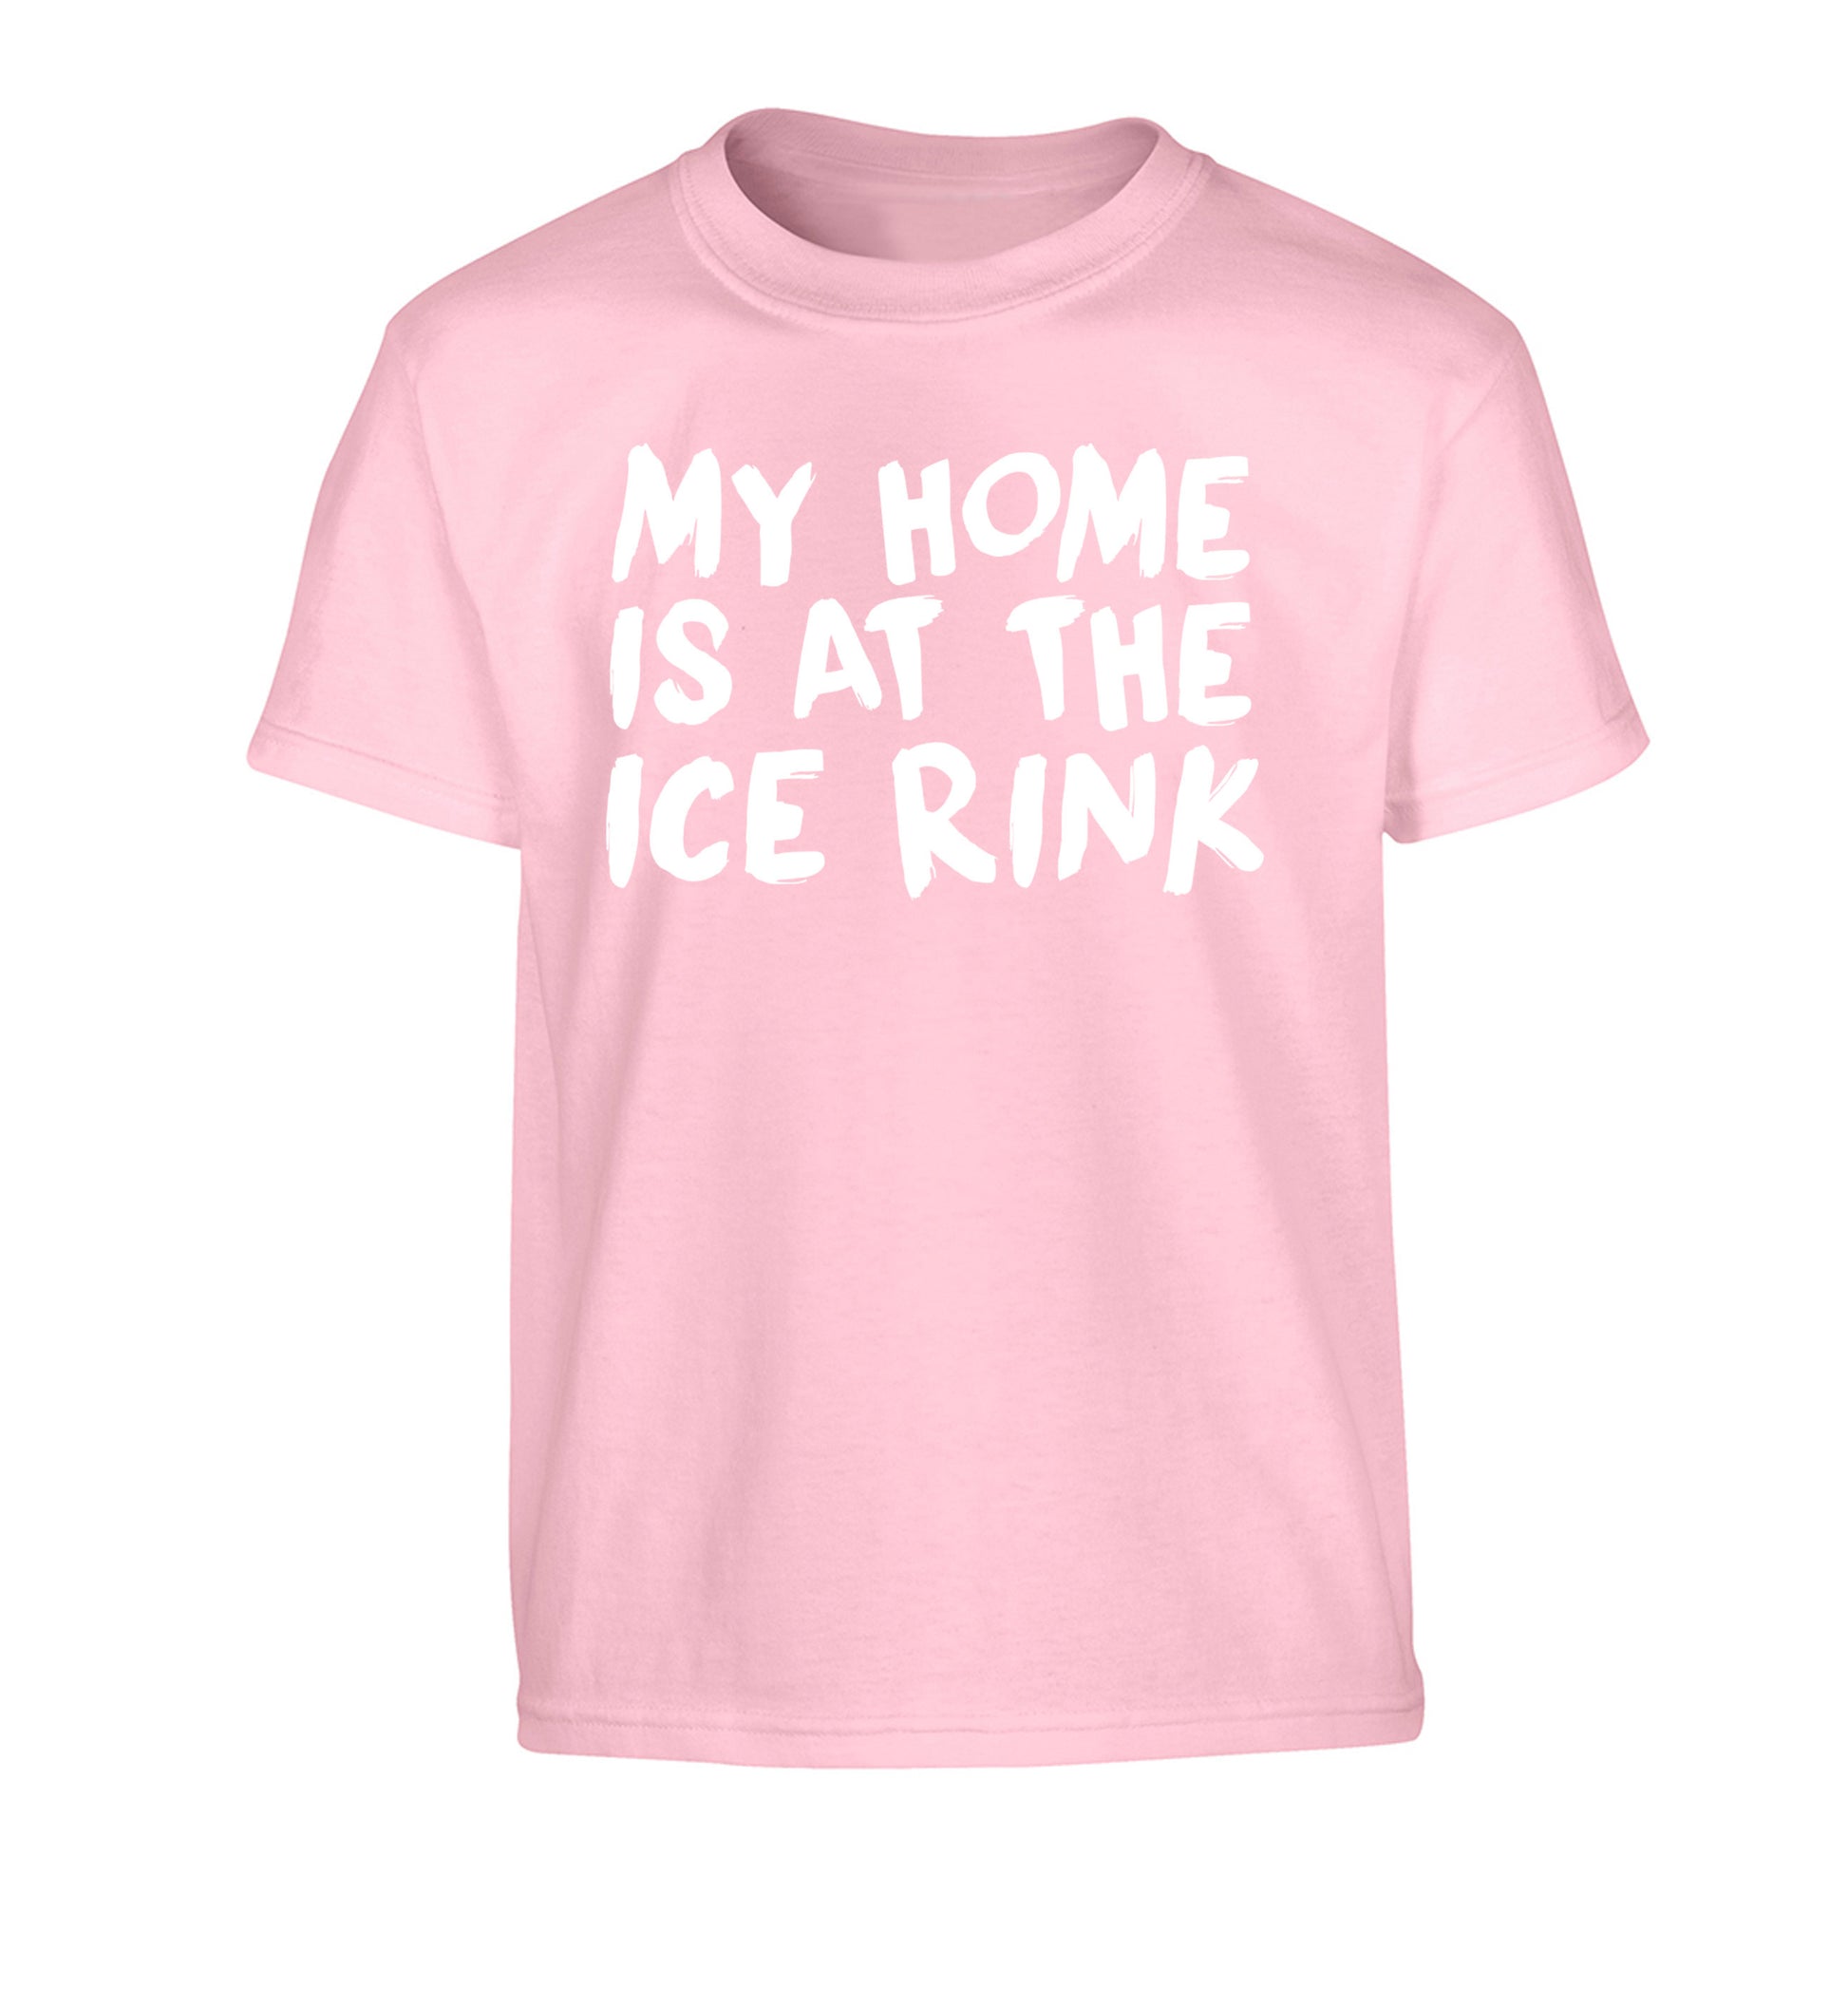 My home is at the ice rink Children's light pink Tshirt 12-14 Years